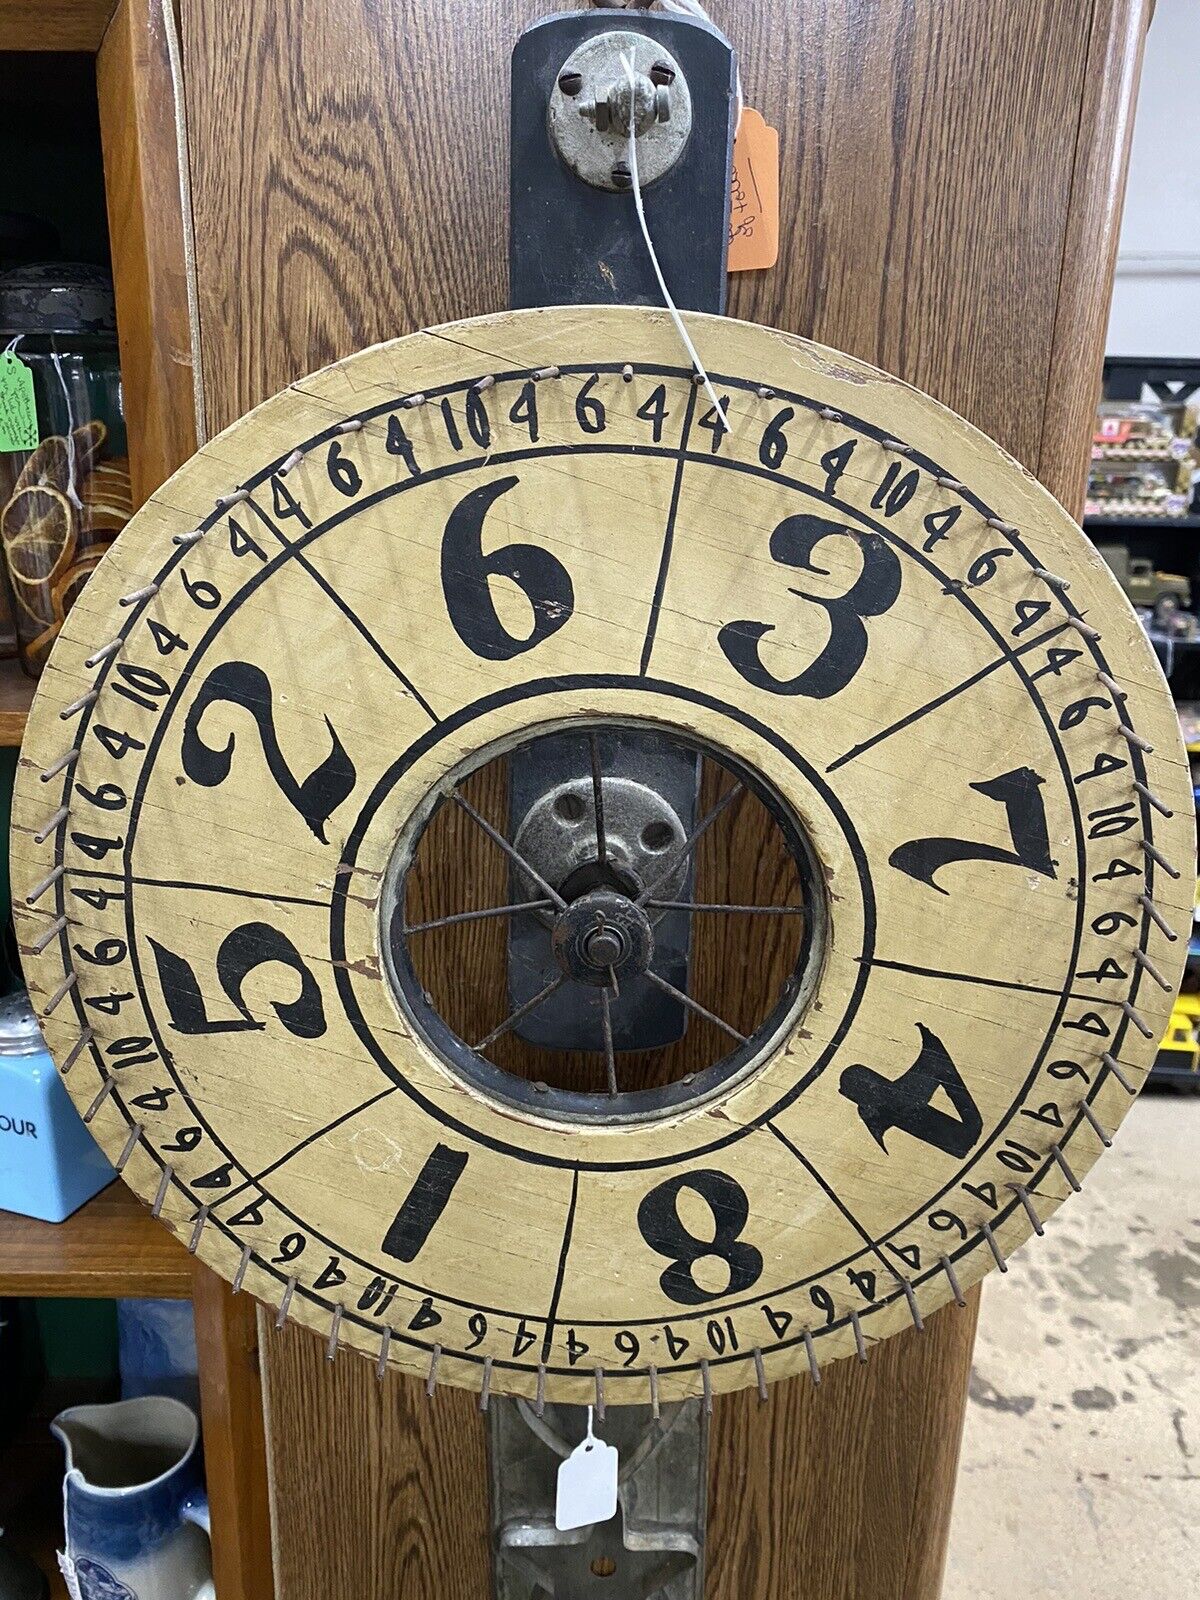 Vintage Carnival Wheel Game Of Chance - Hand Painted & Set On A Wooden Bike Rim